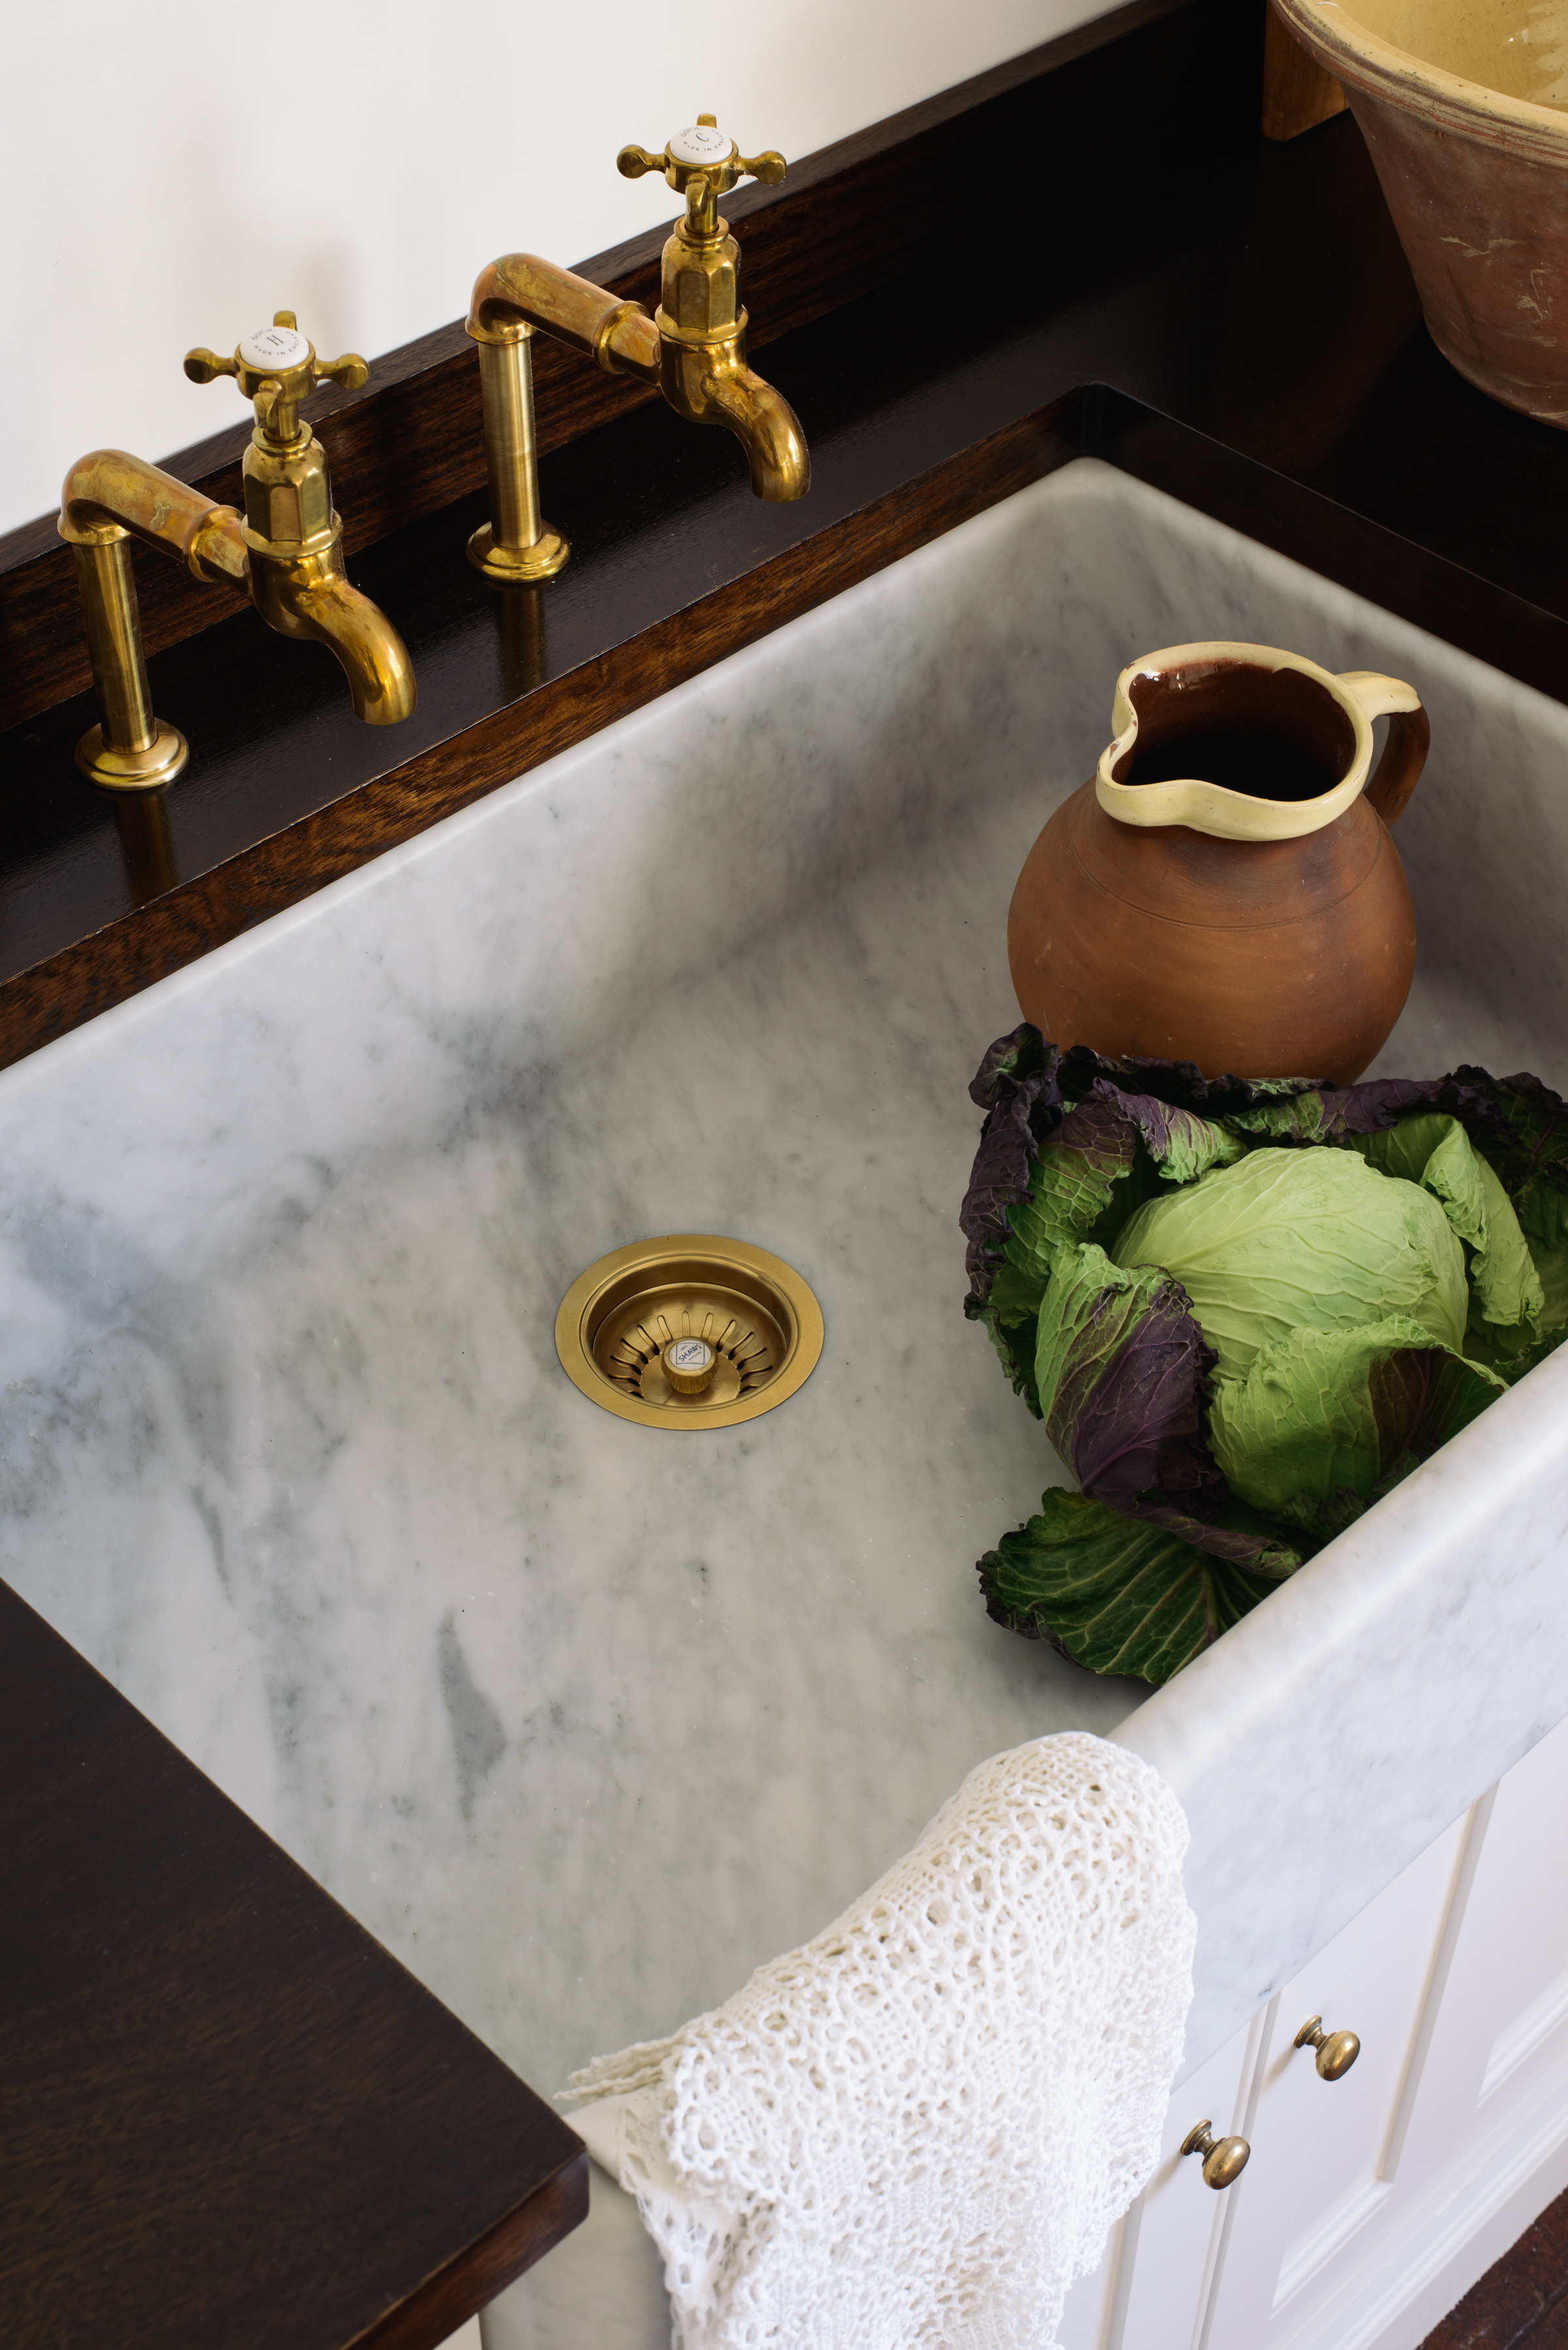 A solid block of Carrara marble is used to make these beautiful sinks. The taps are Perrin and Rowe, in deVOLs aged brass finish exclusive to us.